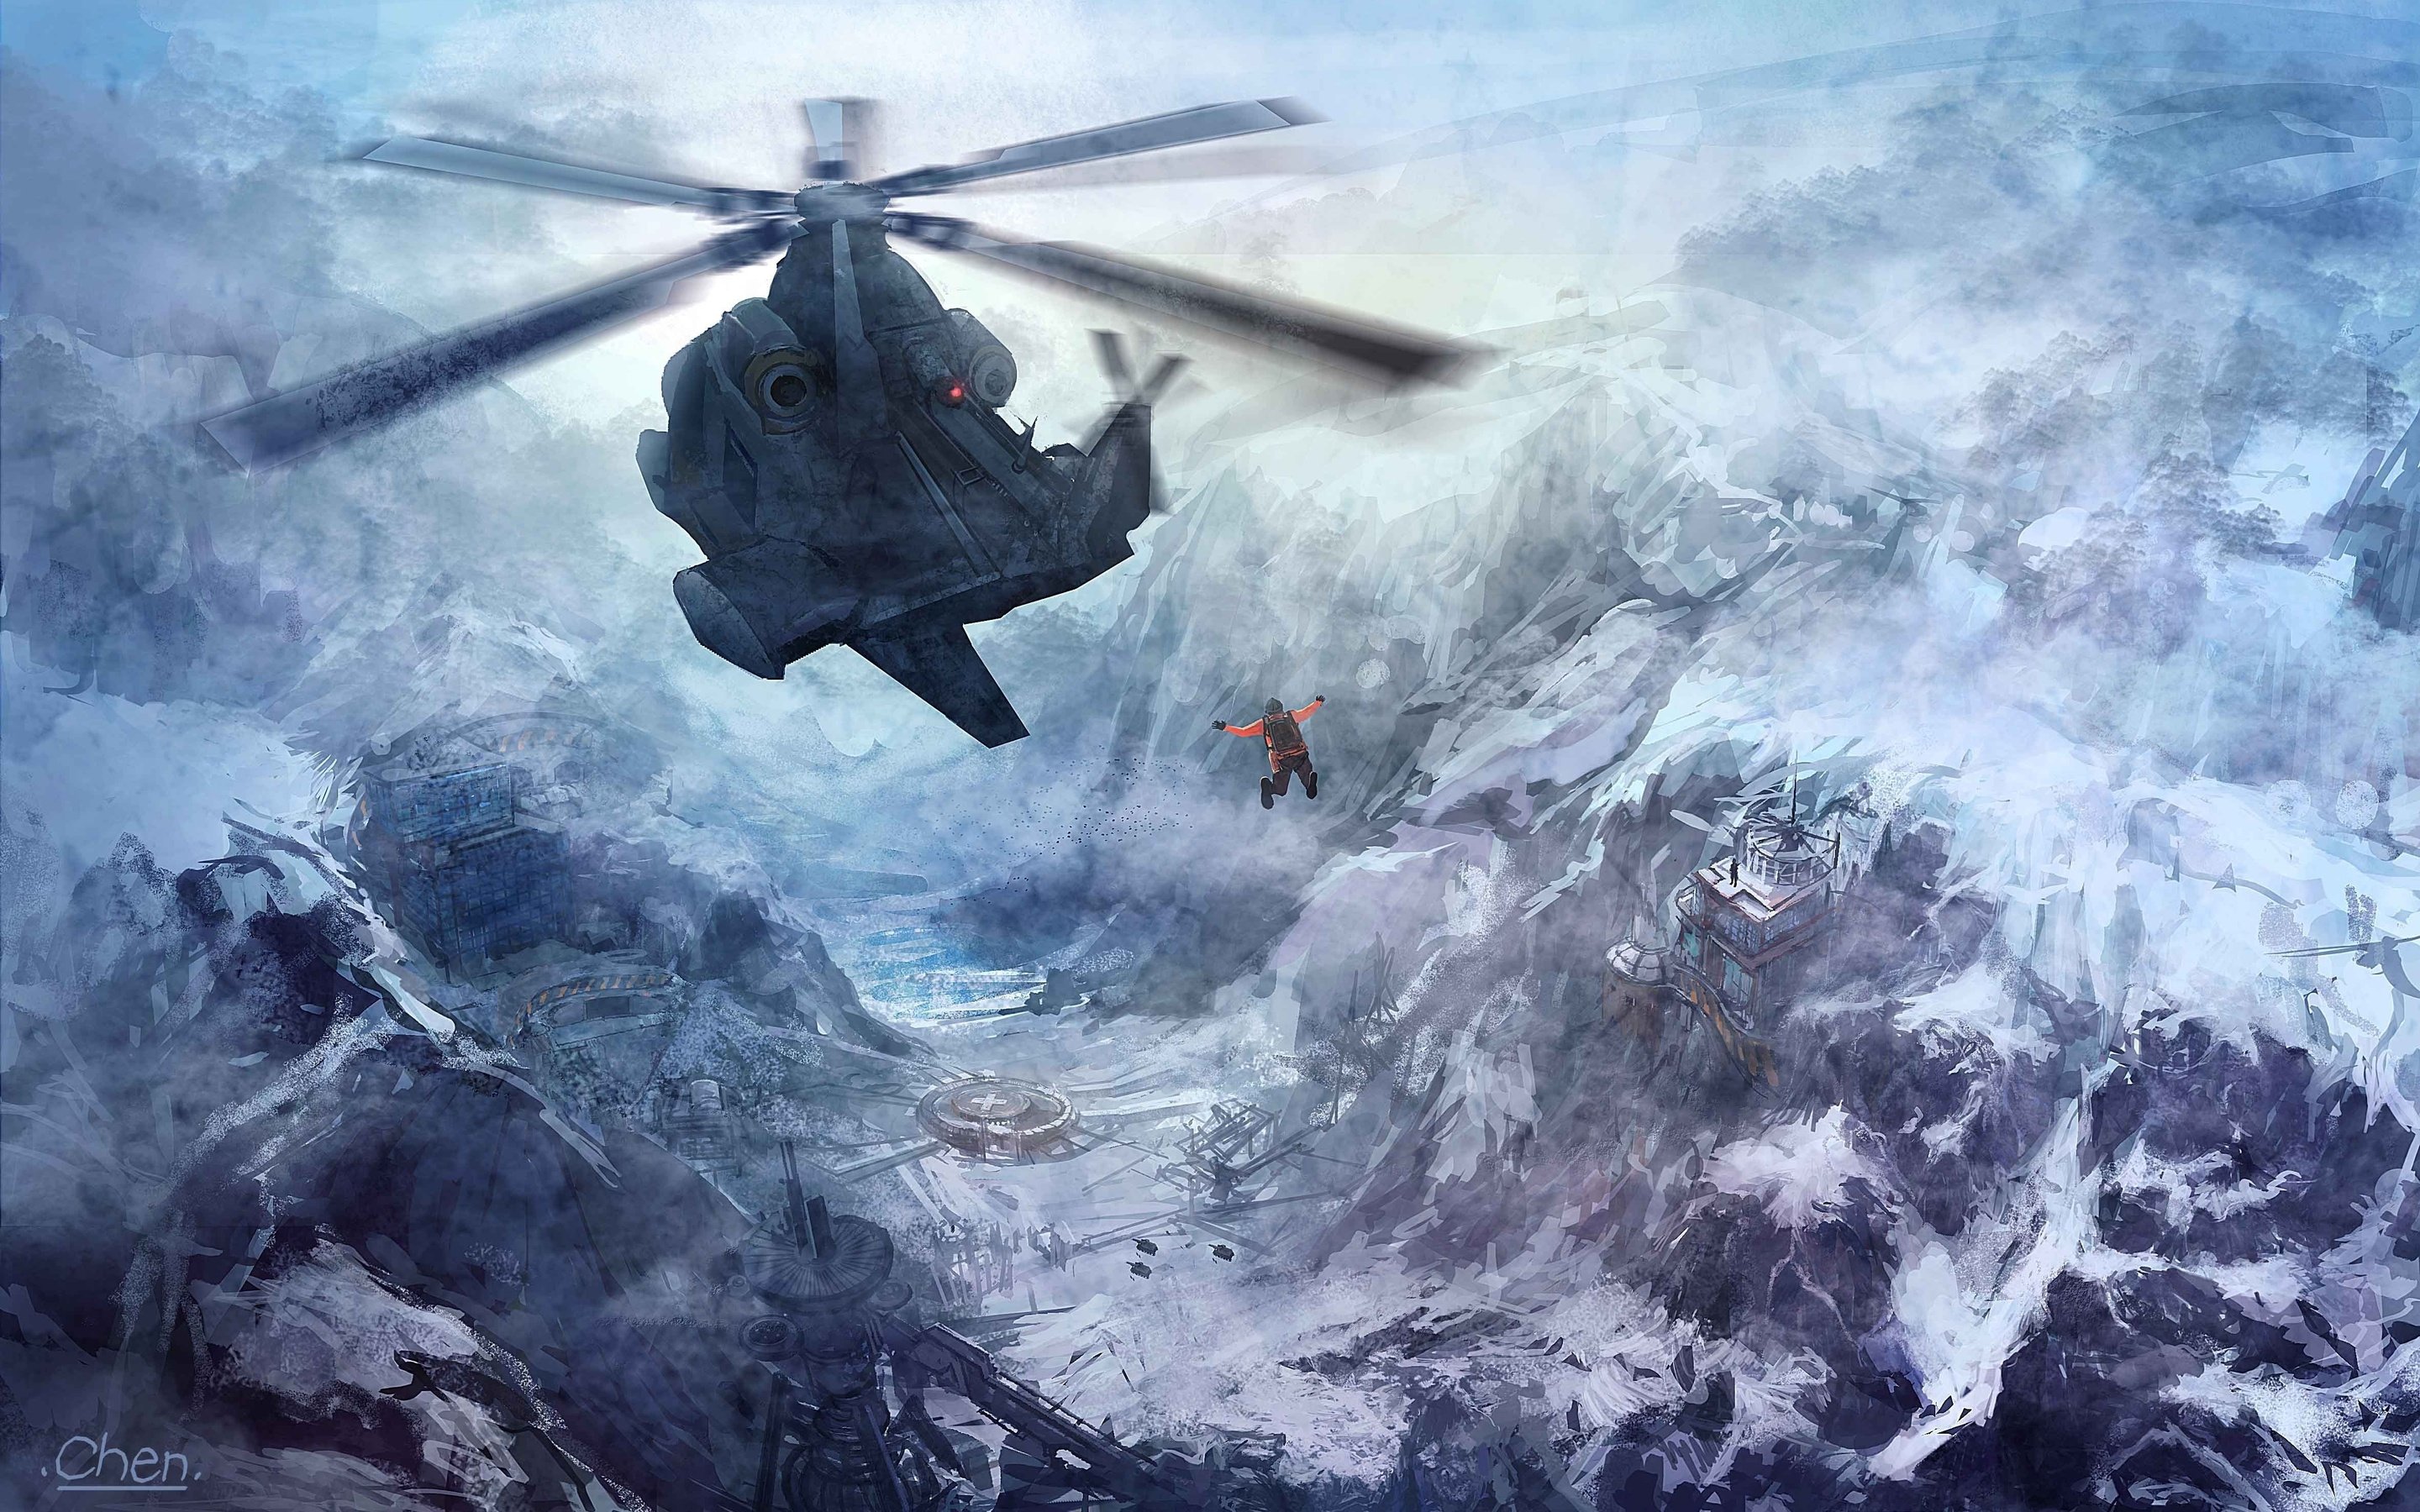 snow, Art, Richard, Chen, Helicopter, Flight, Mountains, People, Base Wallpaper